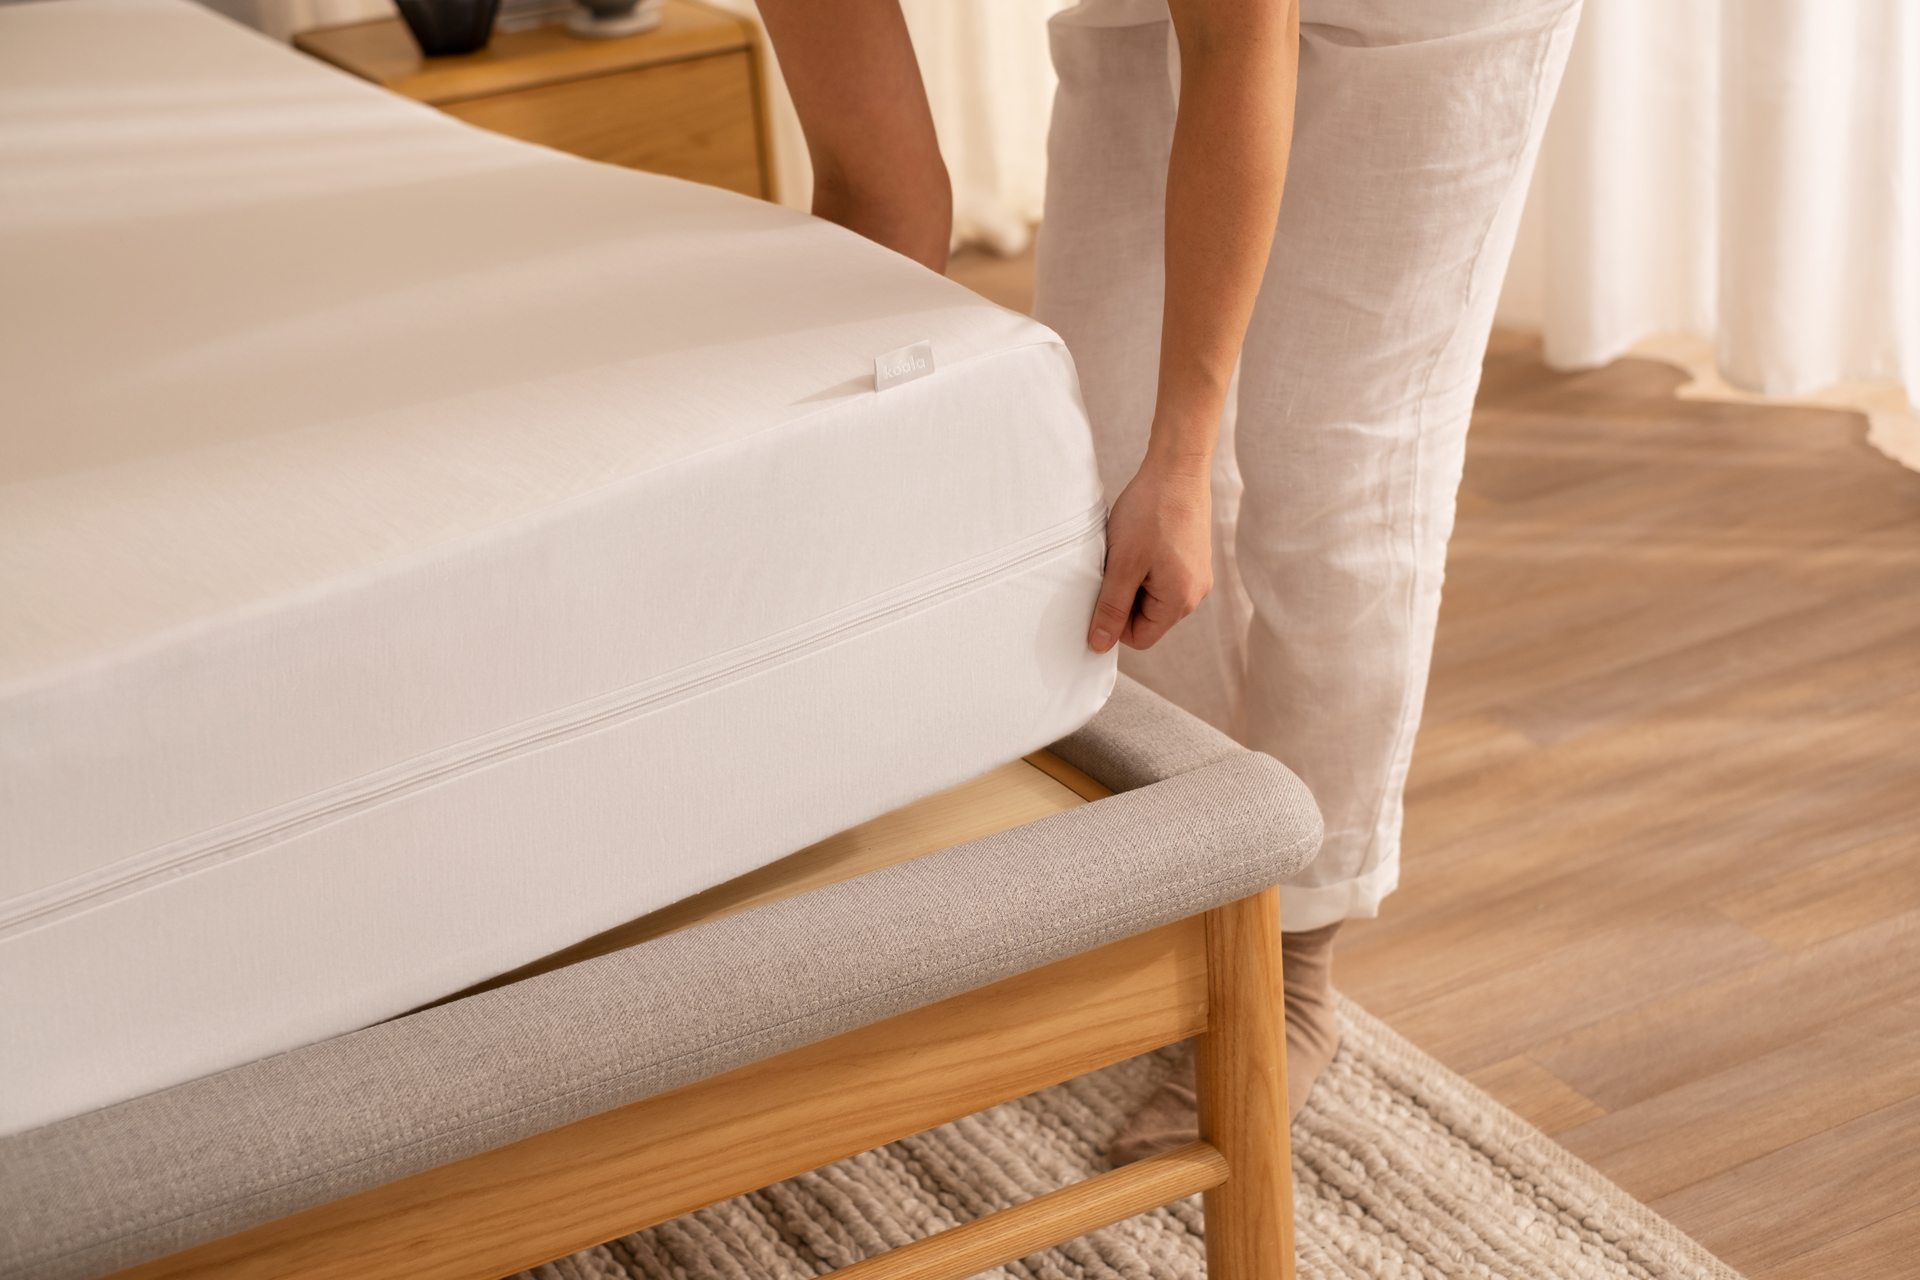 A close-up image of the corner of a bed as a woman finishes adjusting the mattress protector on the mattress